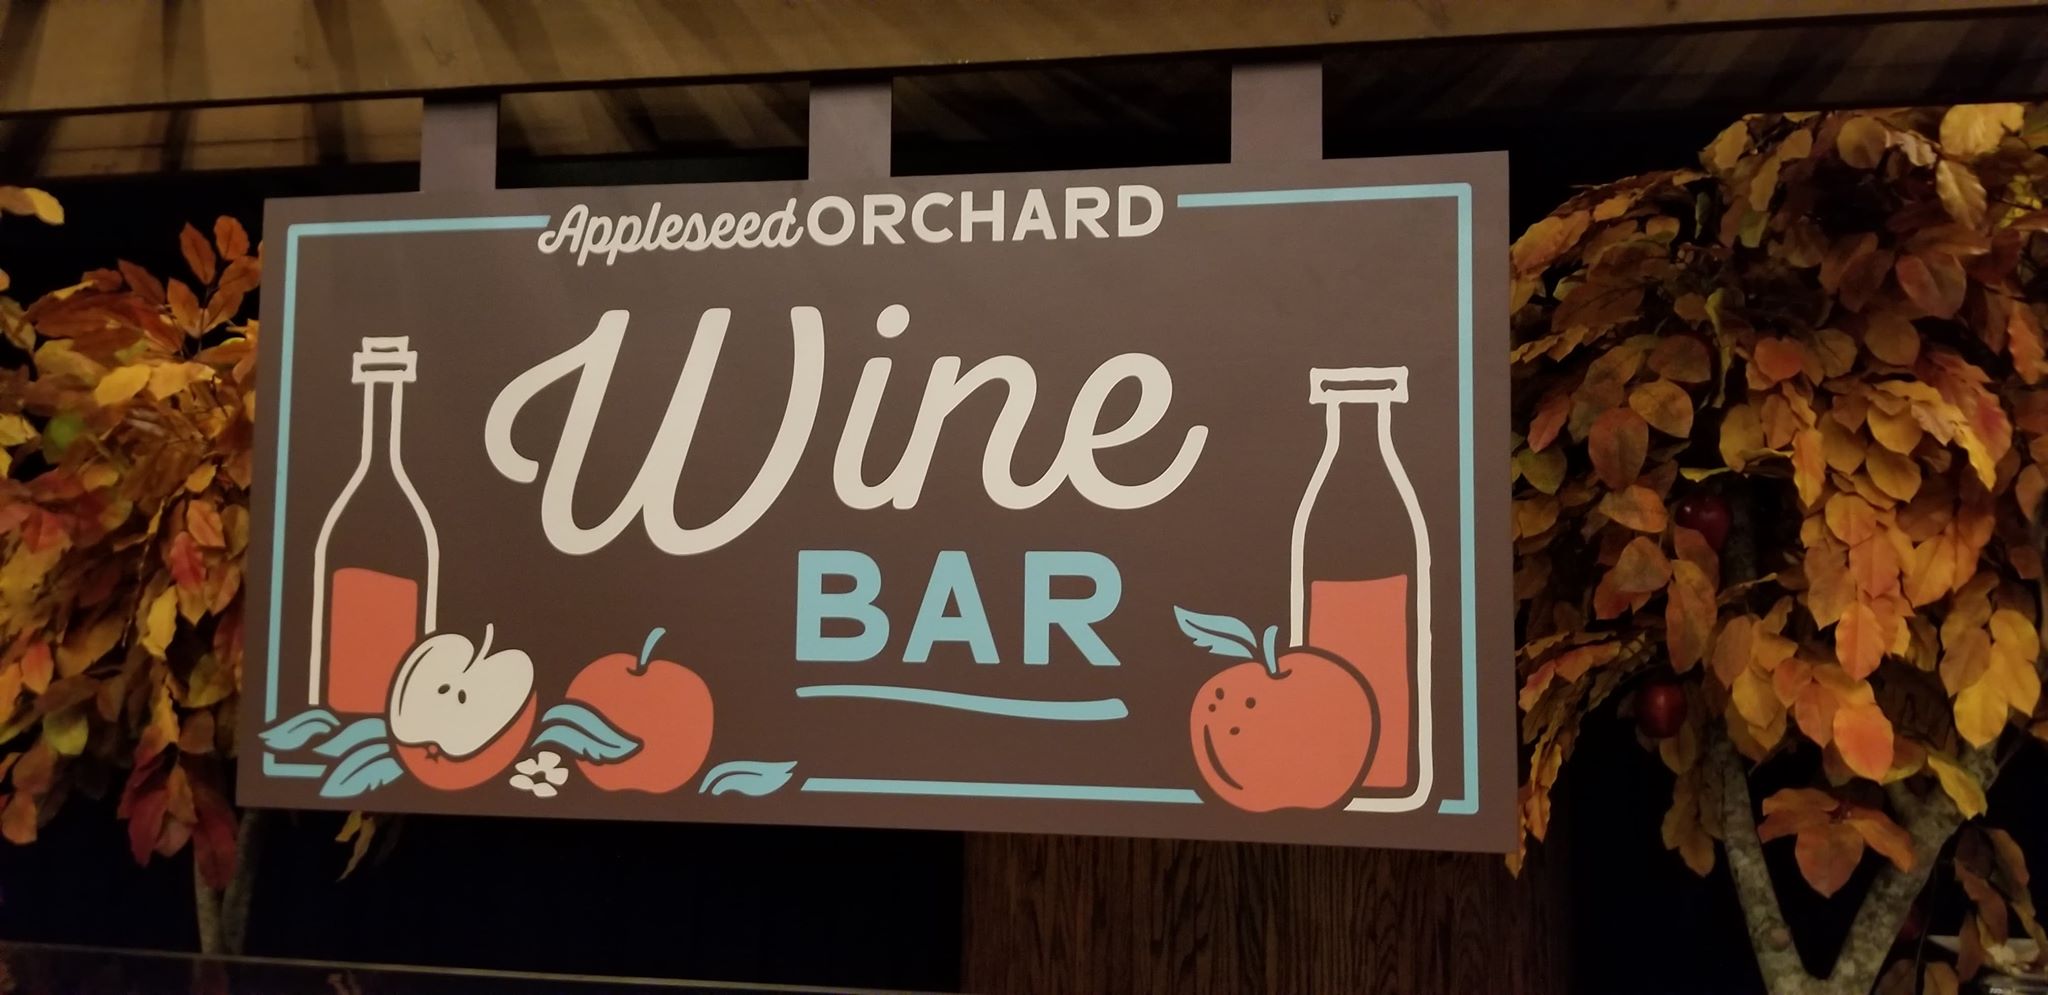 Food And Wine Festival Appleseed Orchard Cider Bar And Wine Bar